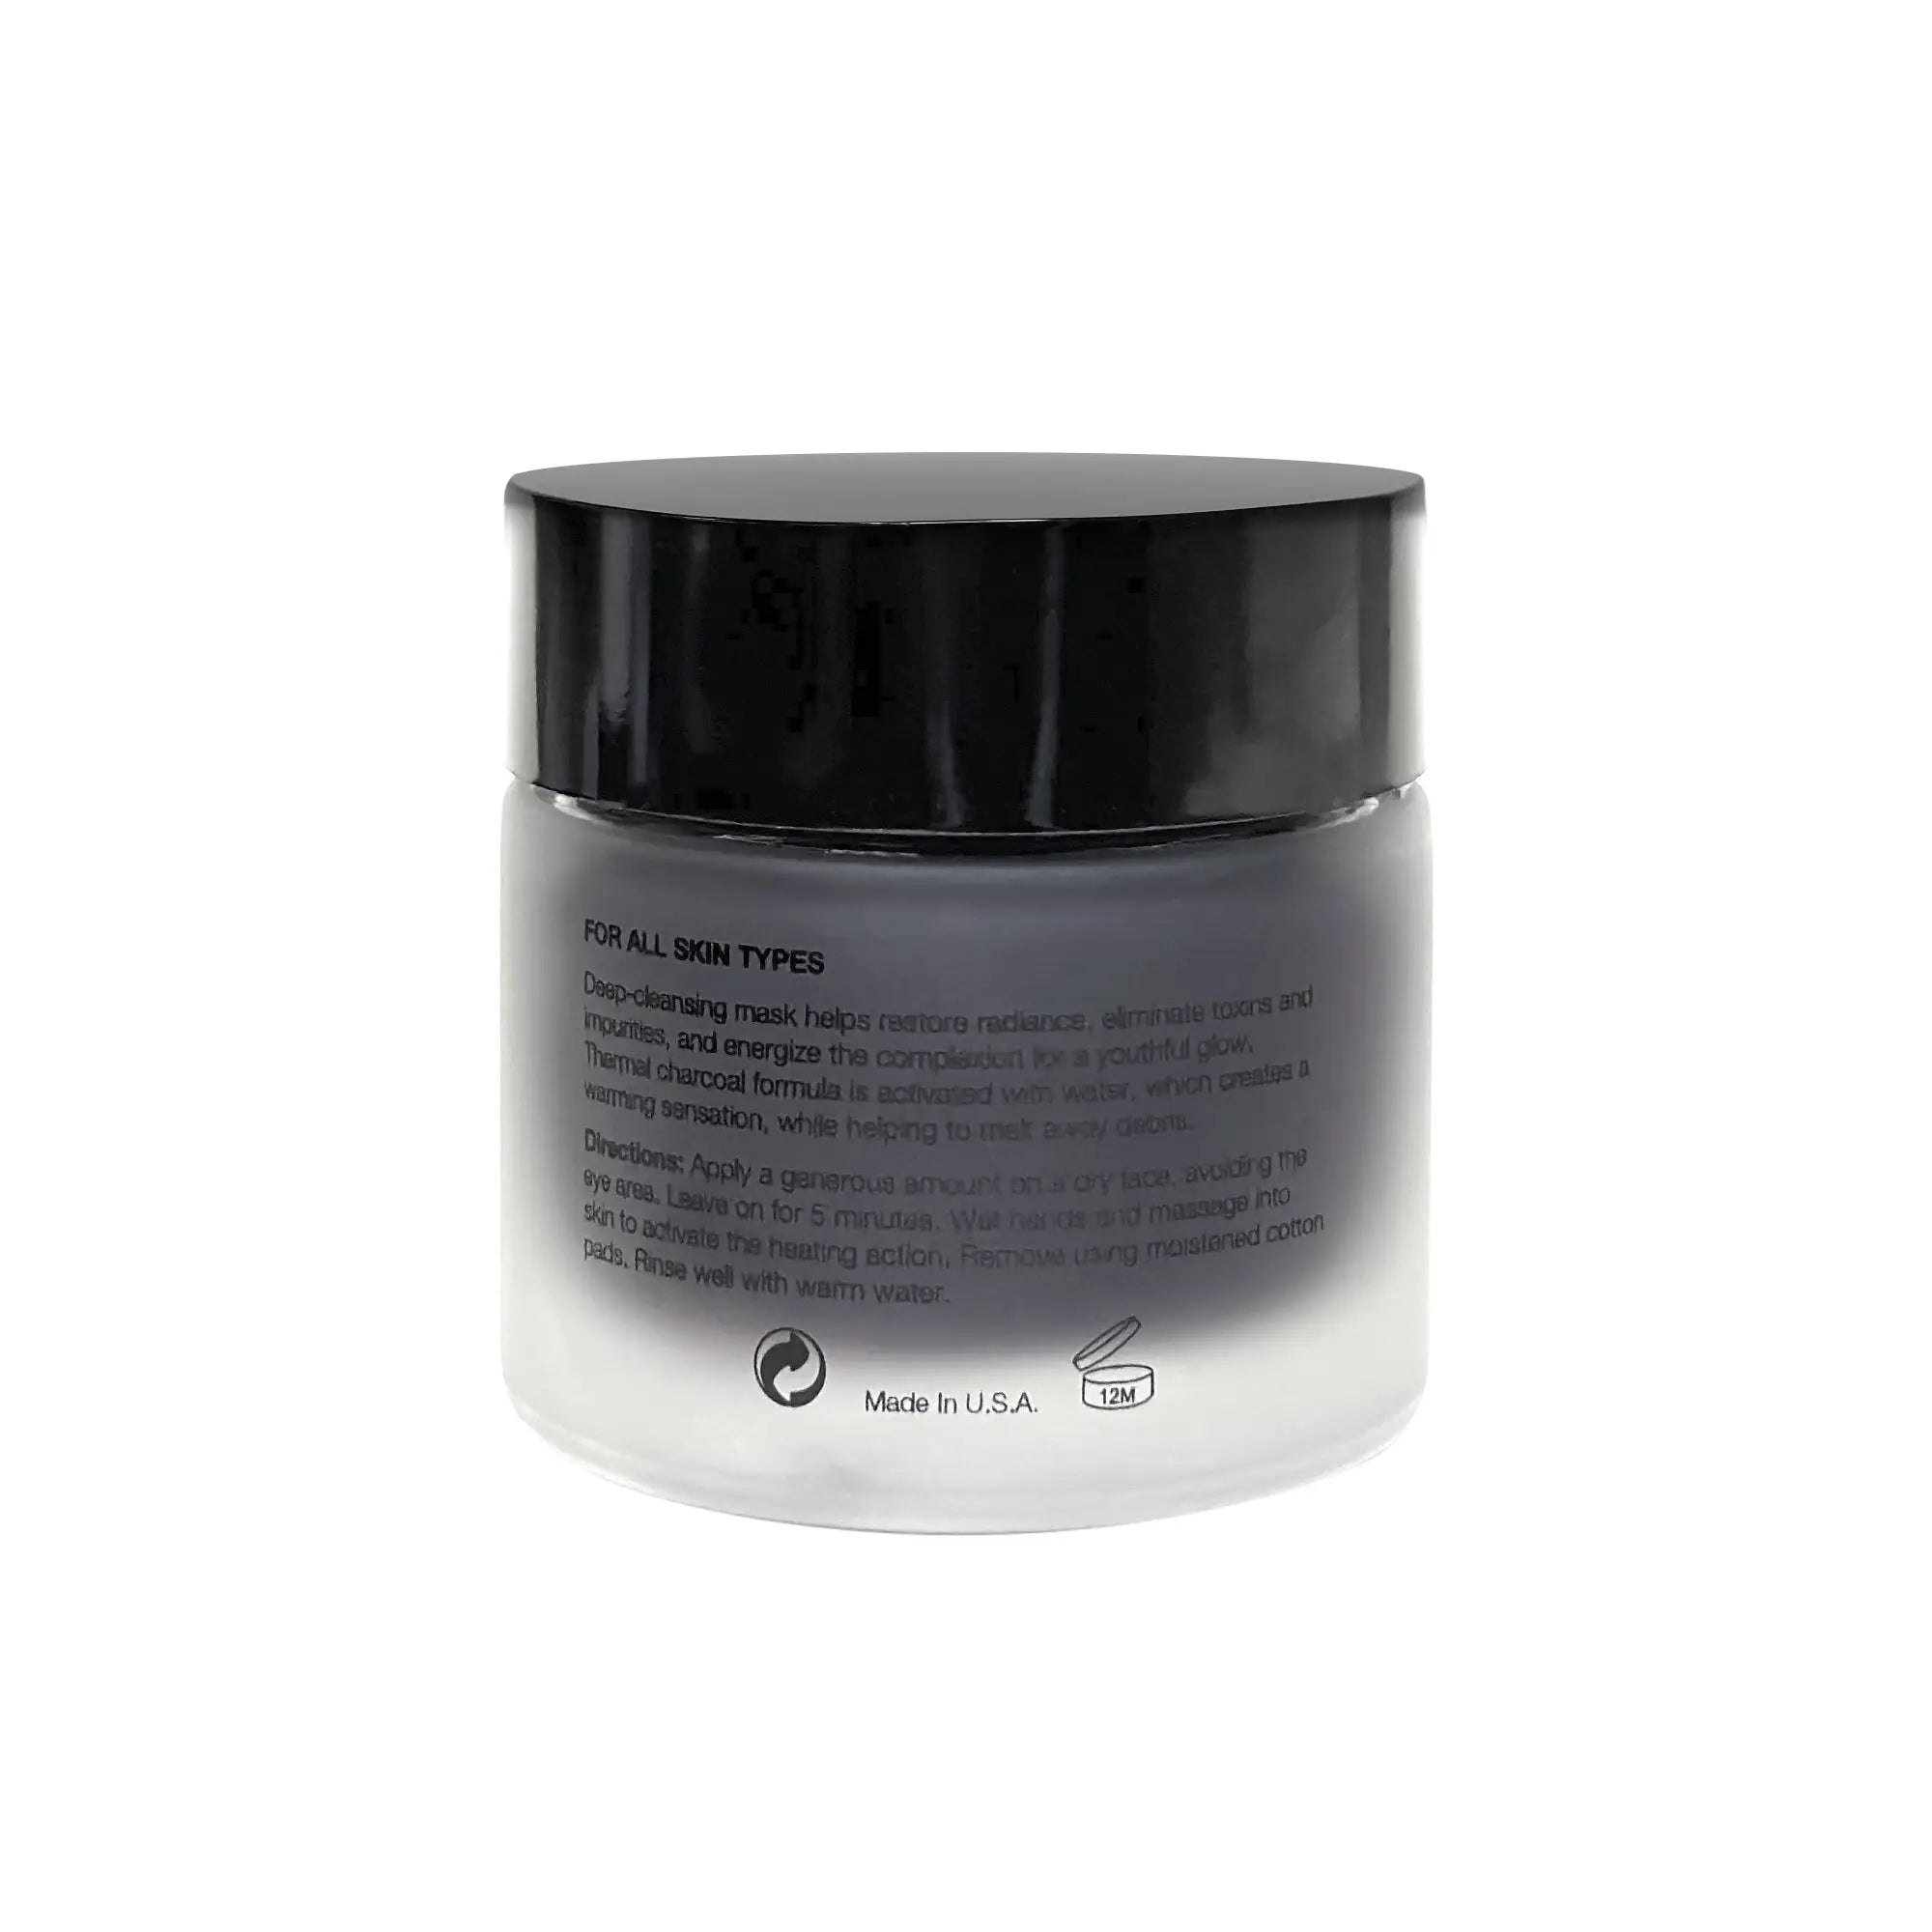 Glow Mask - Premium  from MIANIMED - Just $53! Shop now at MIANIMED